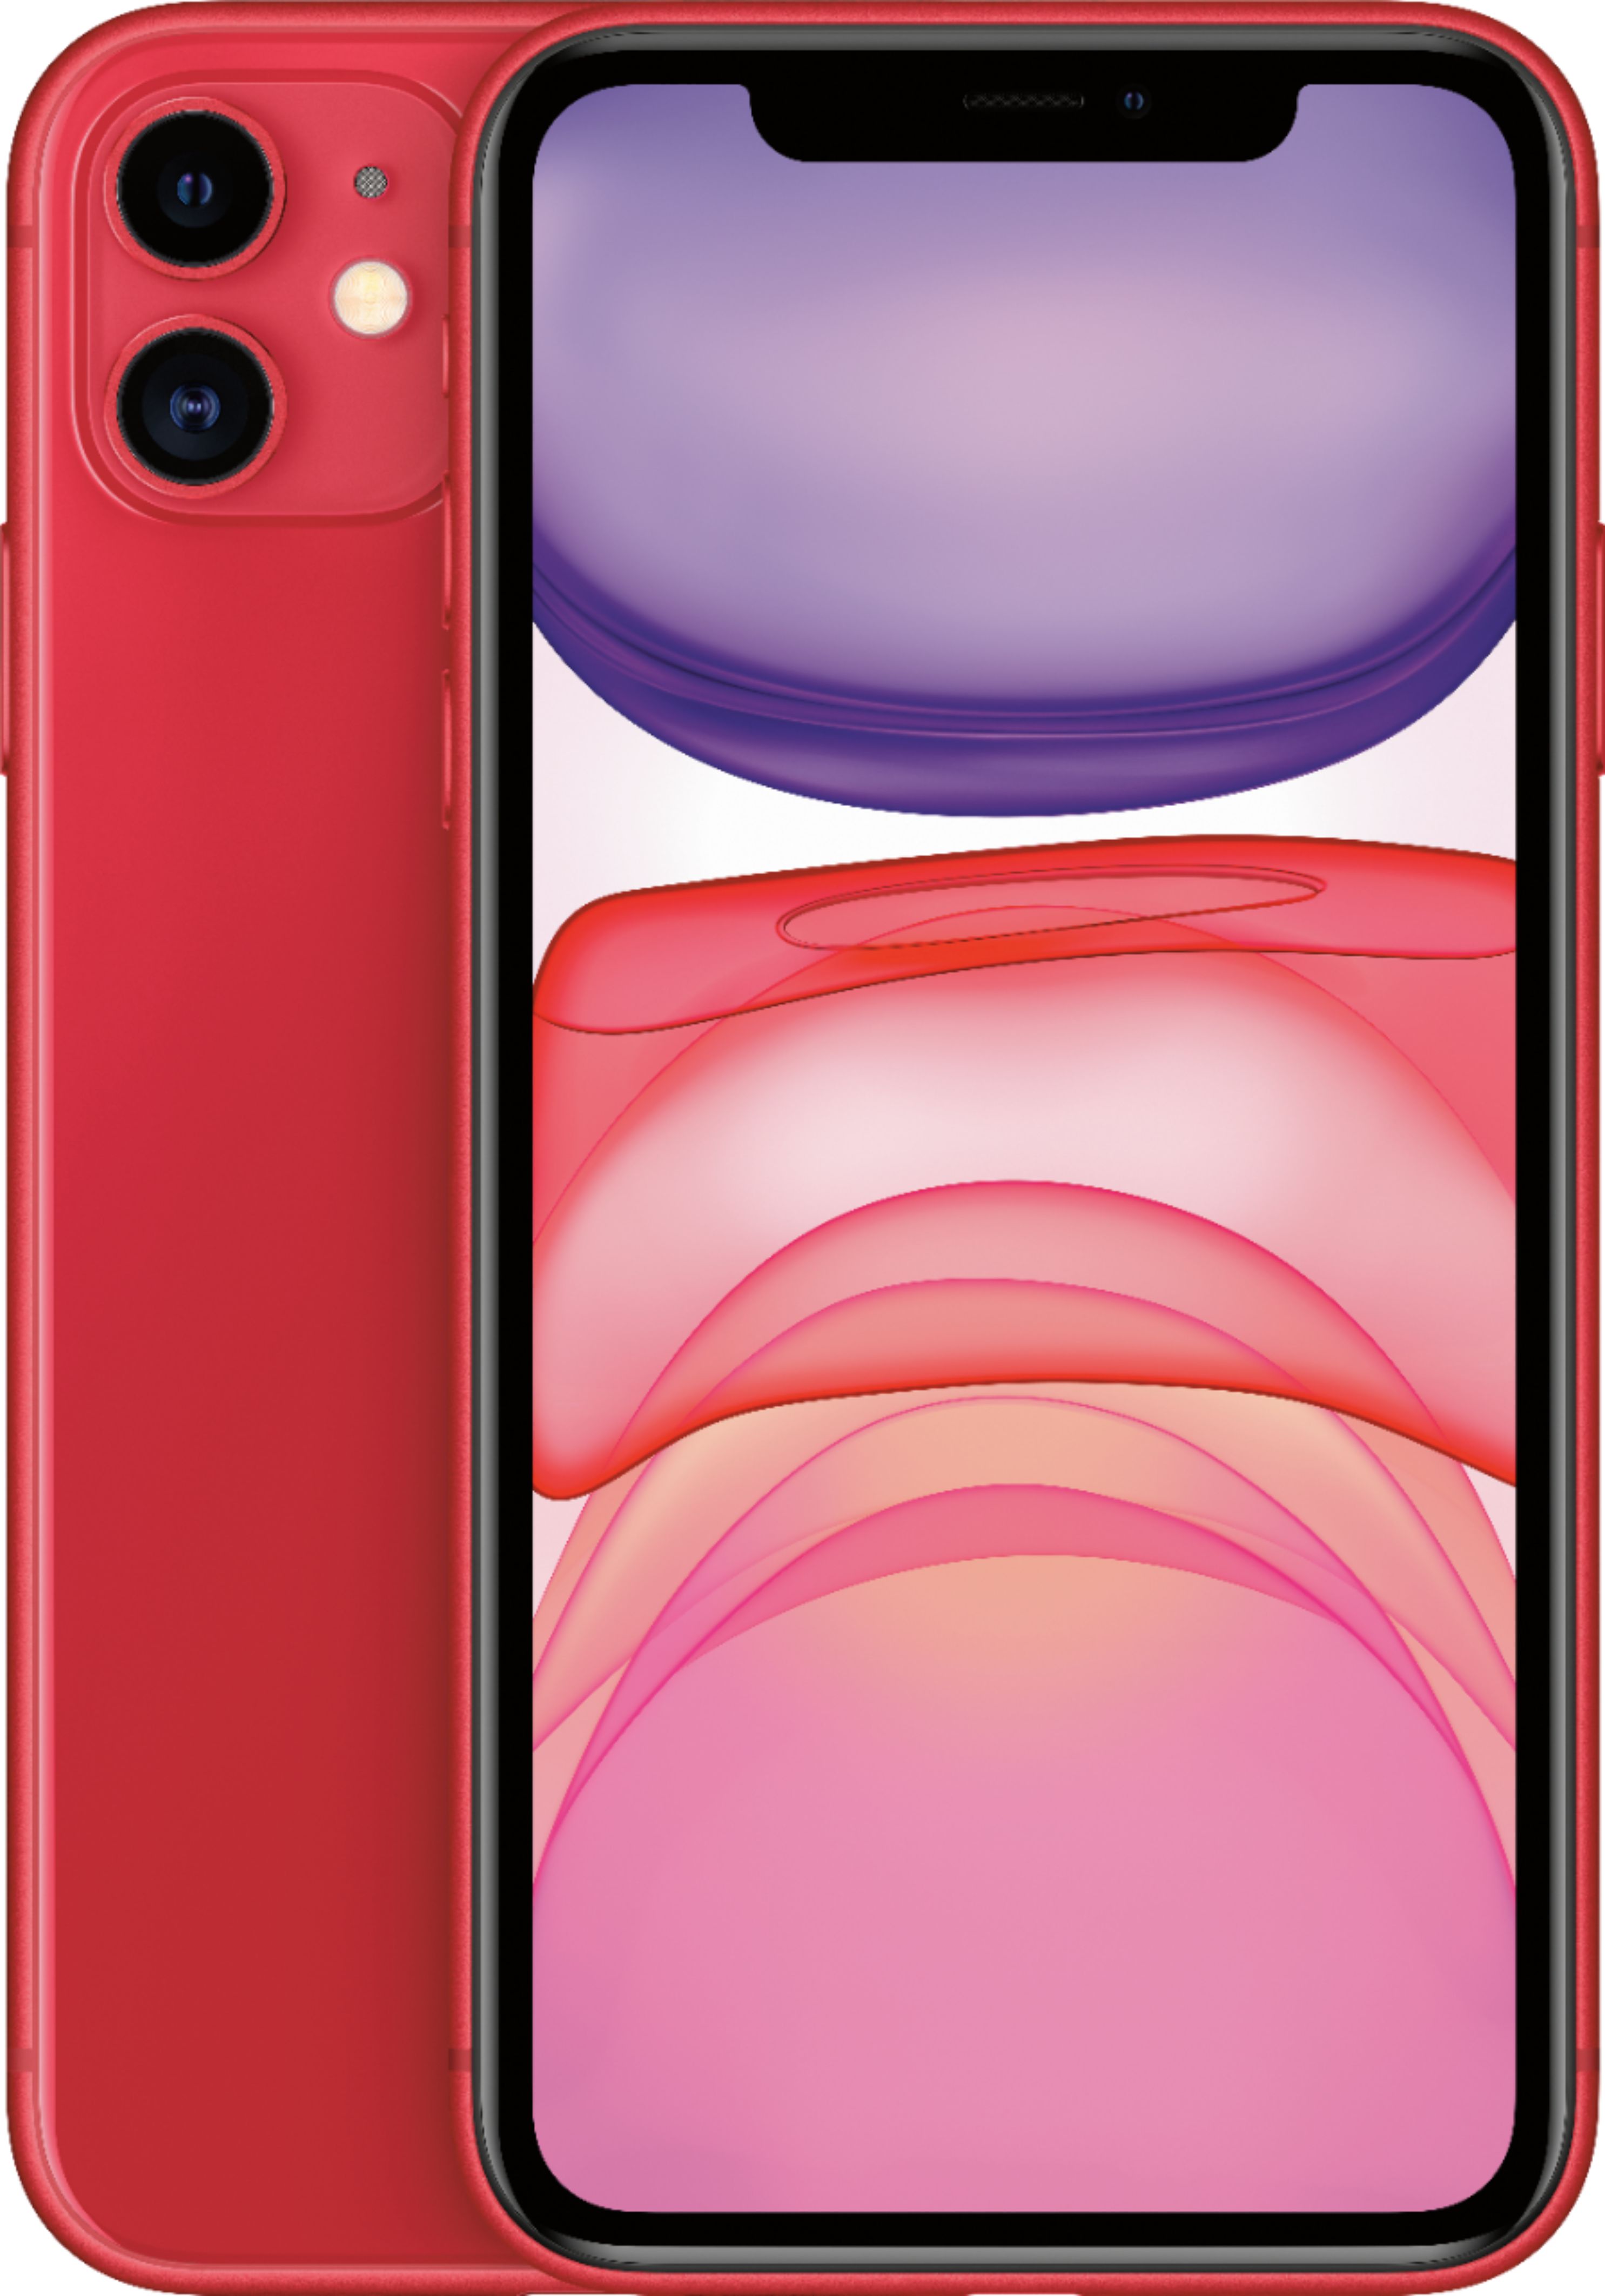 Apple Iphone 11 64gb Product Red At T Mwl92ll A Best Buy